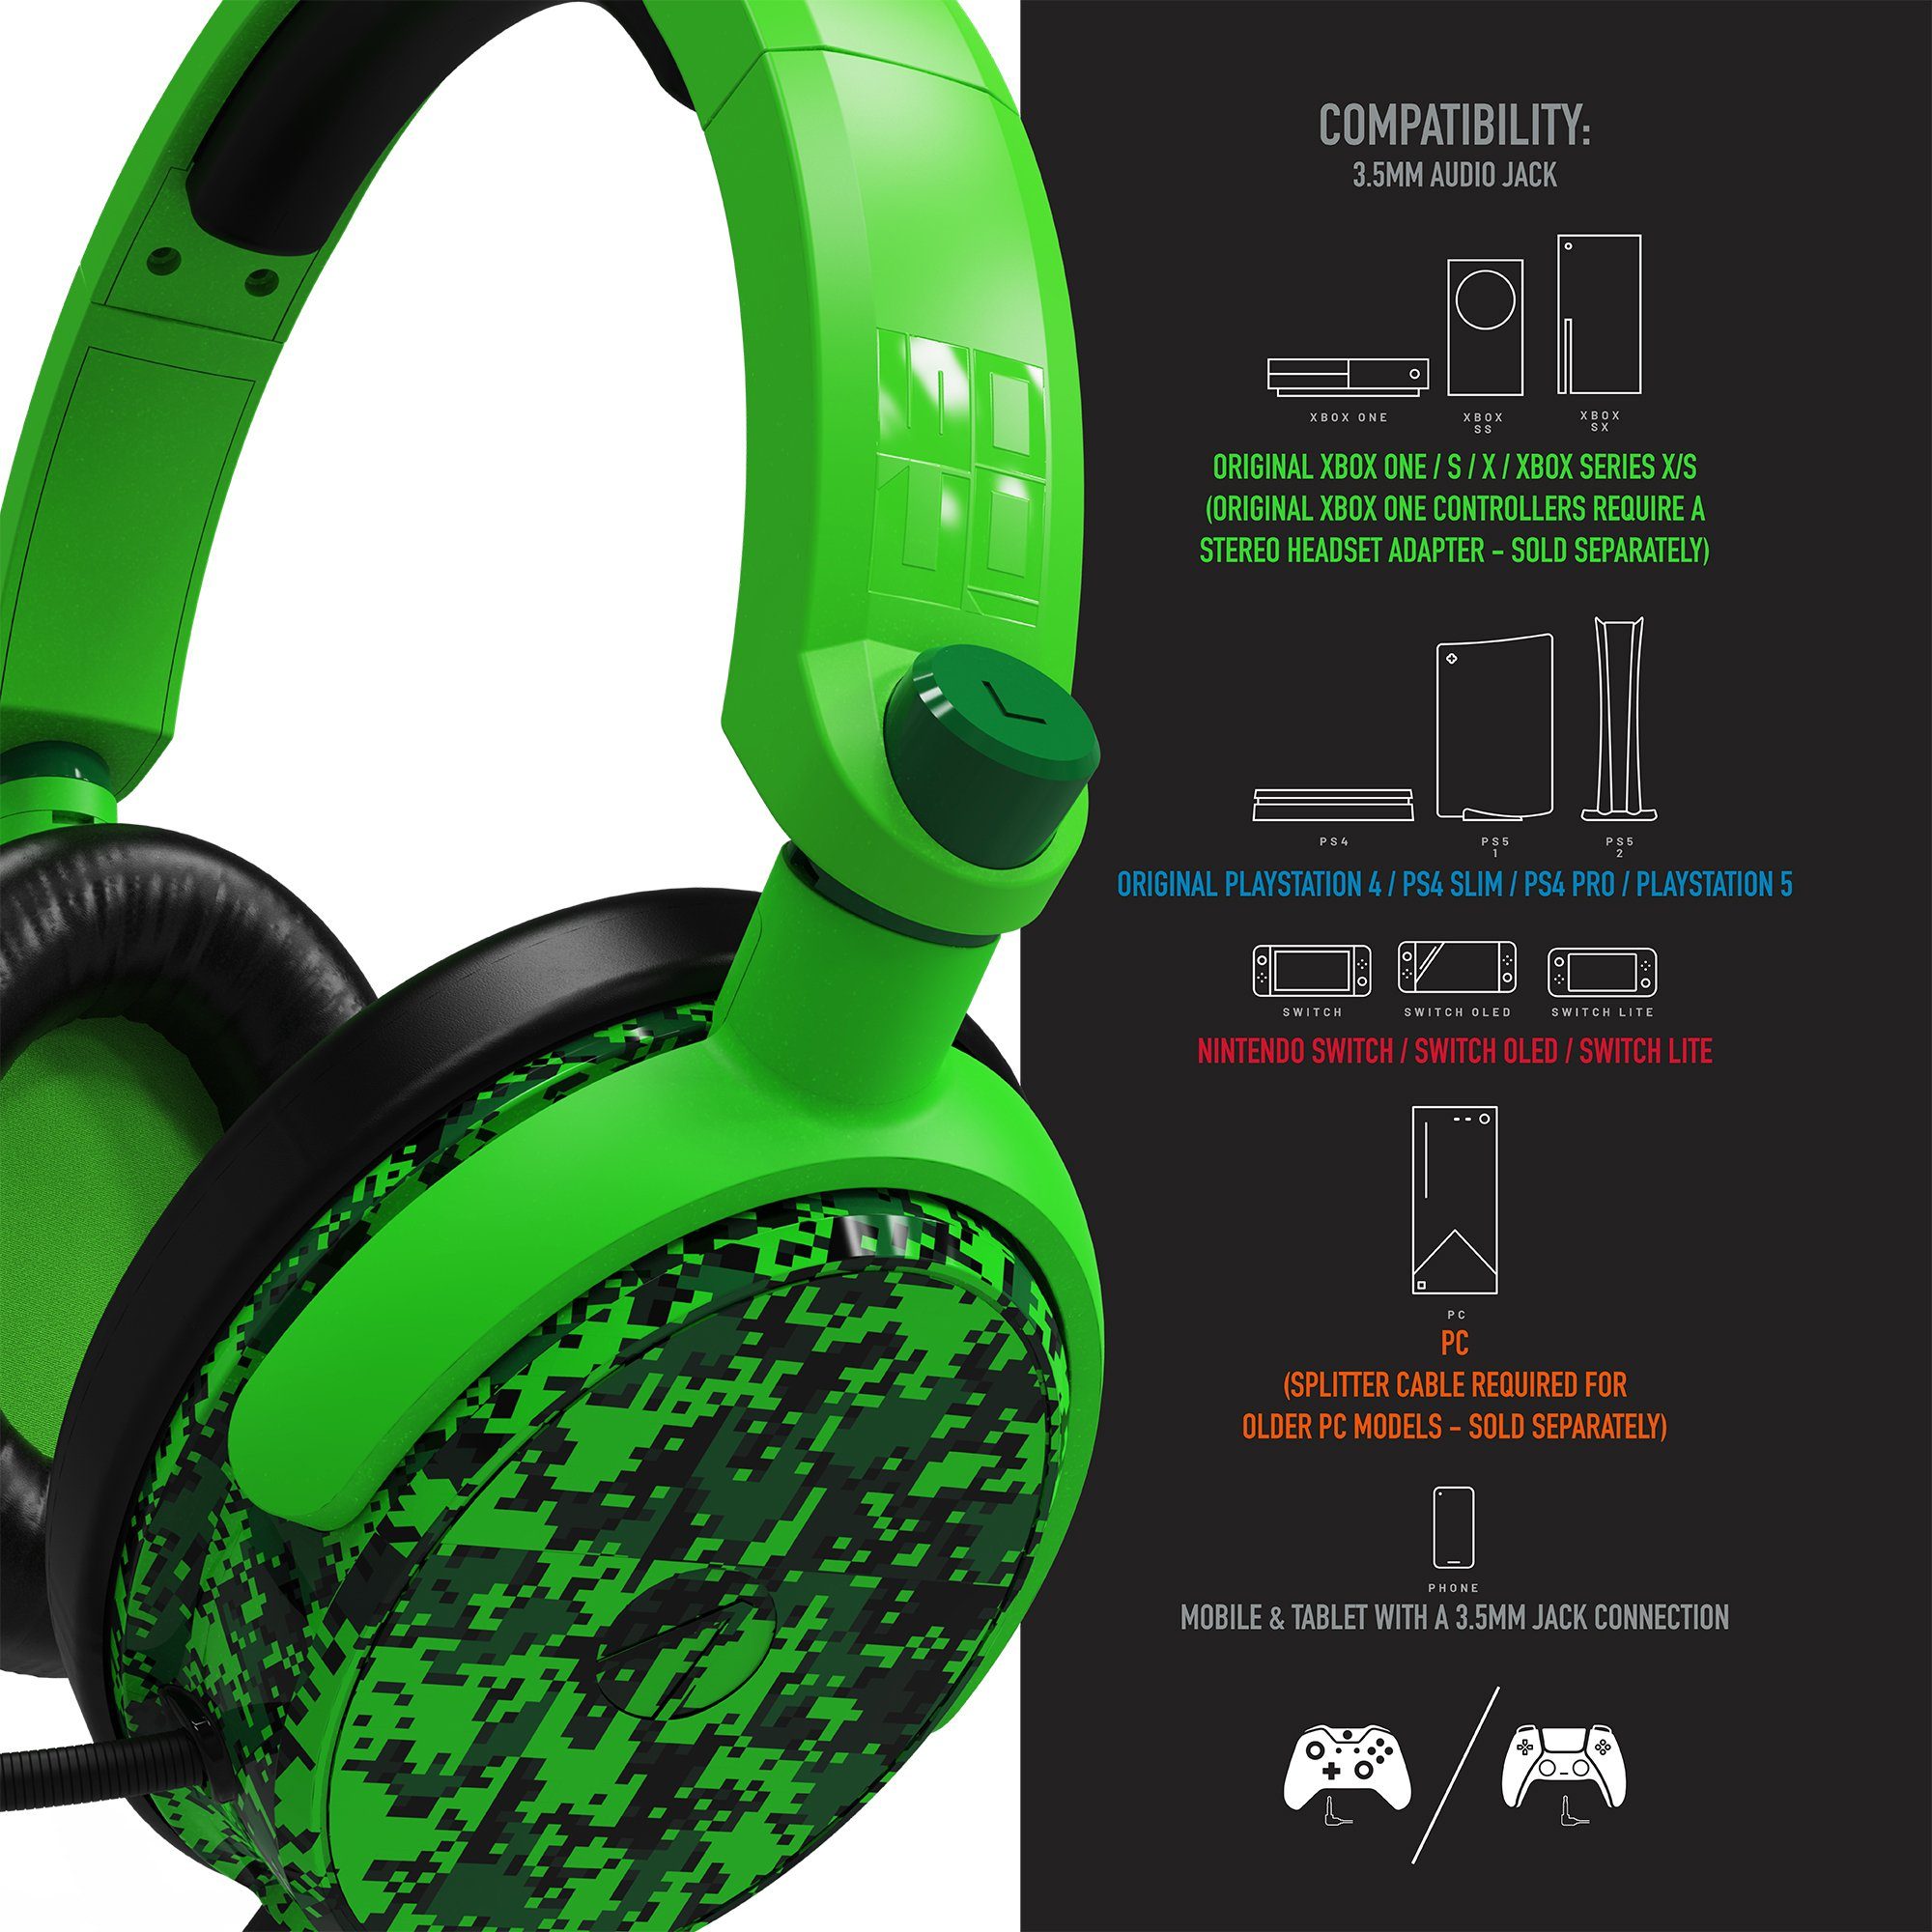 Stealth Multiformat Gaming Camo Headset C6-100 camouflage grün Gaming-Headset